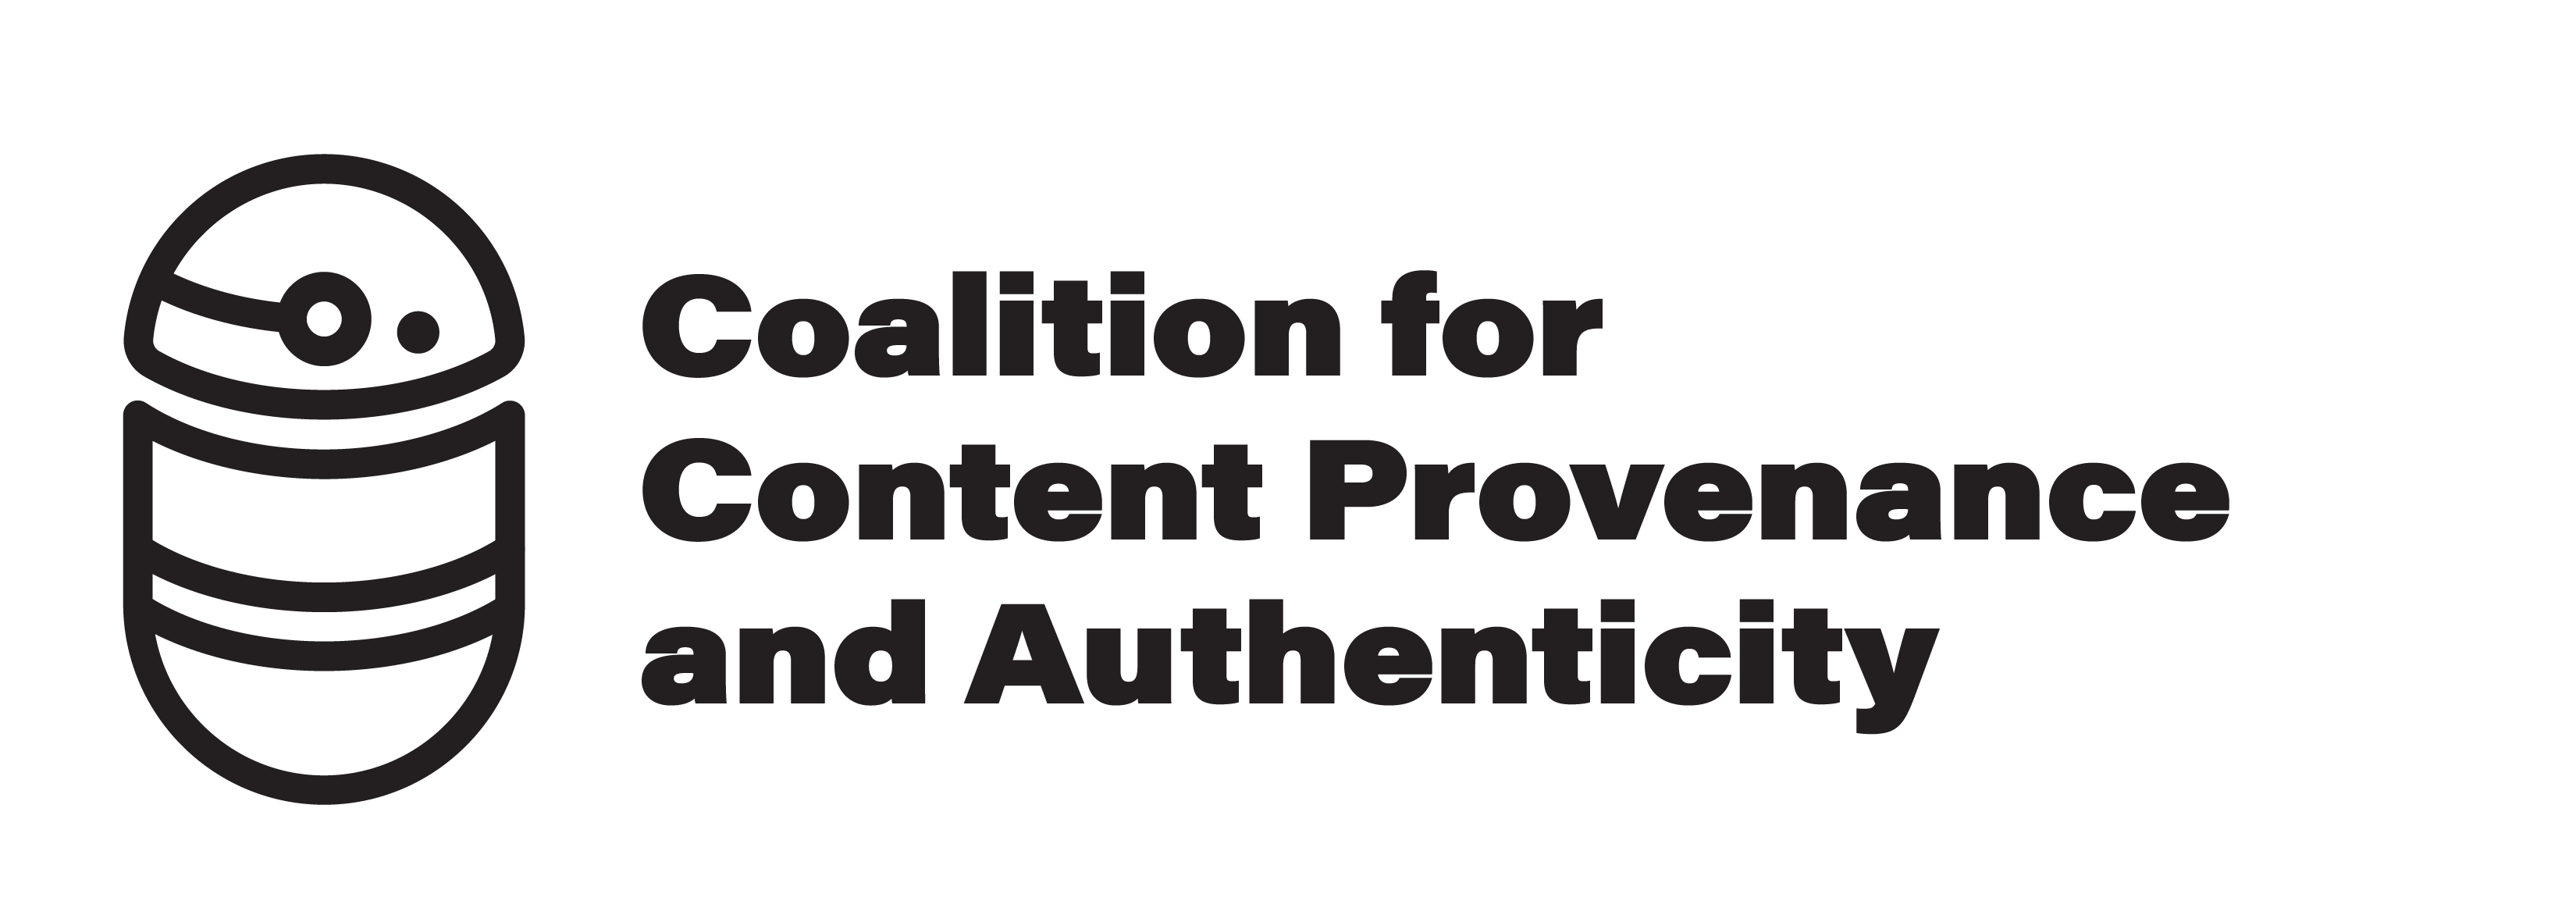 Coalition for Content Provenance and Authenticity logo